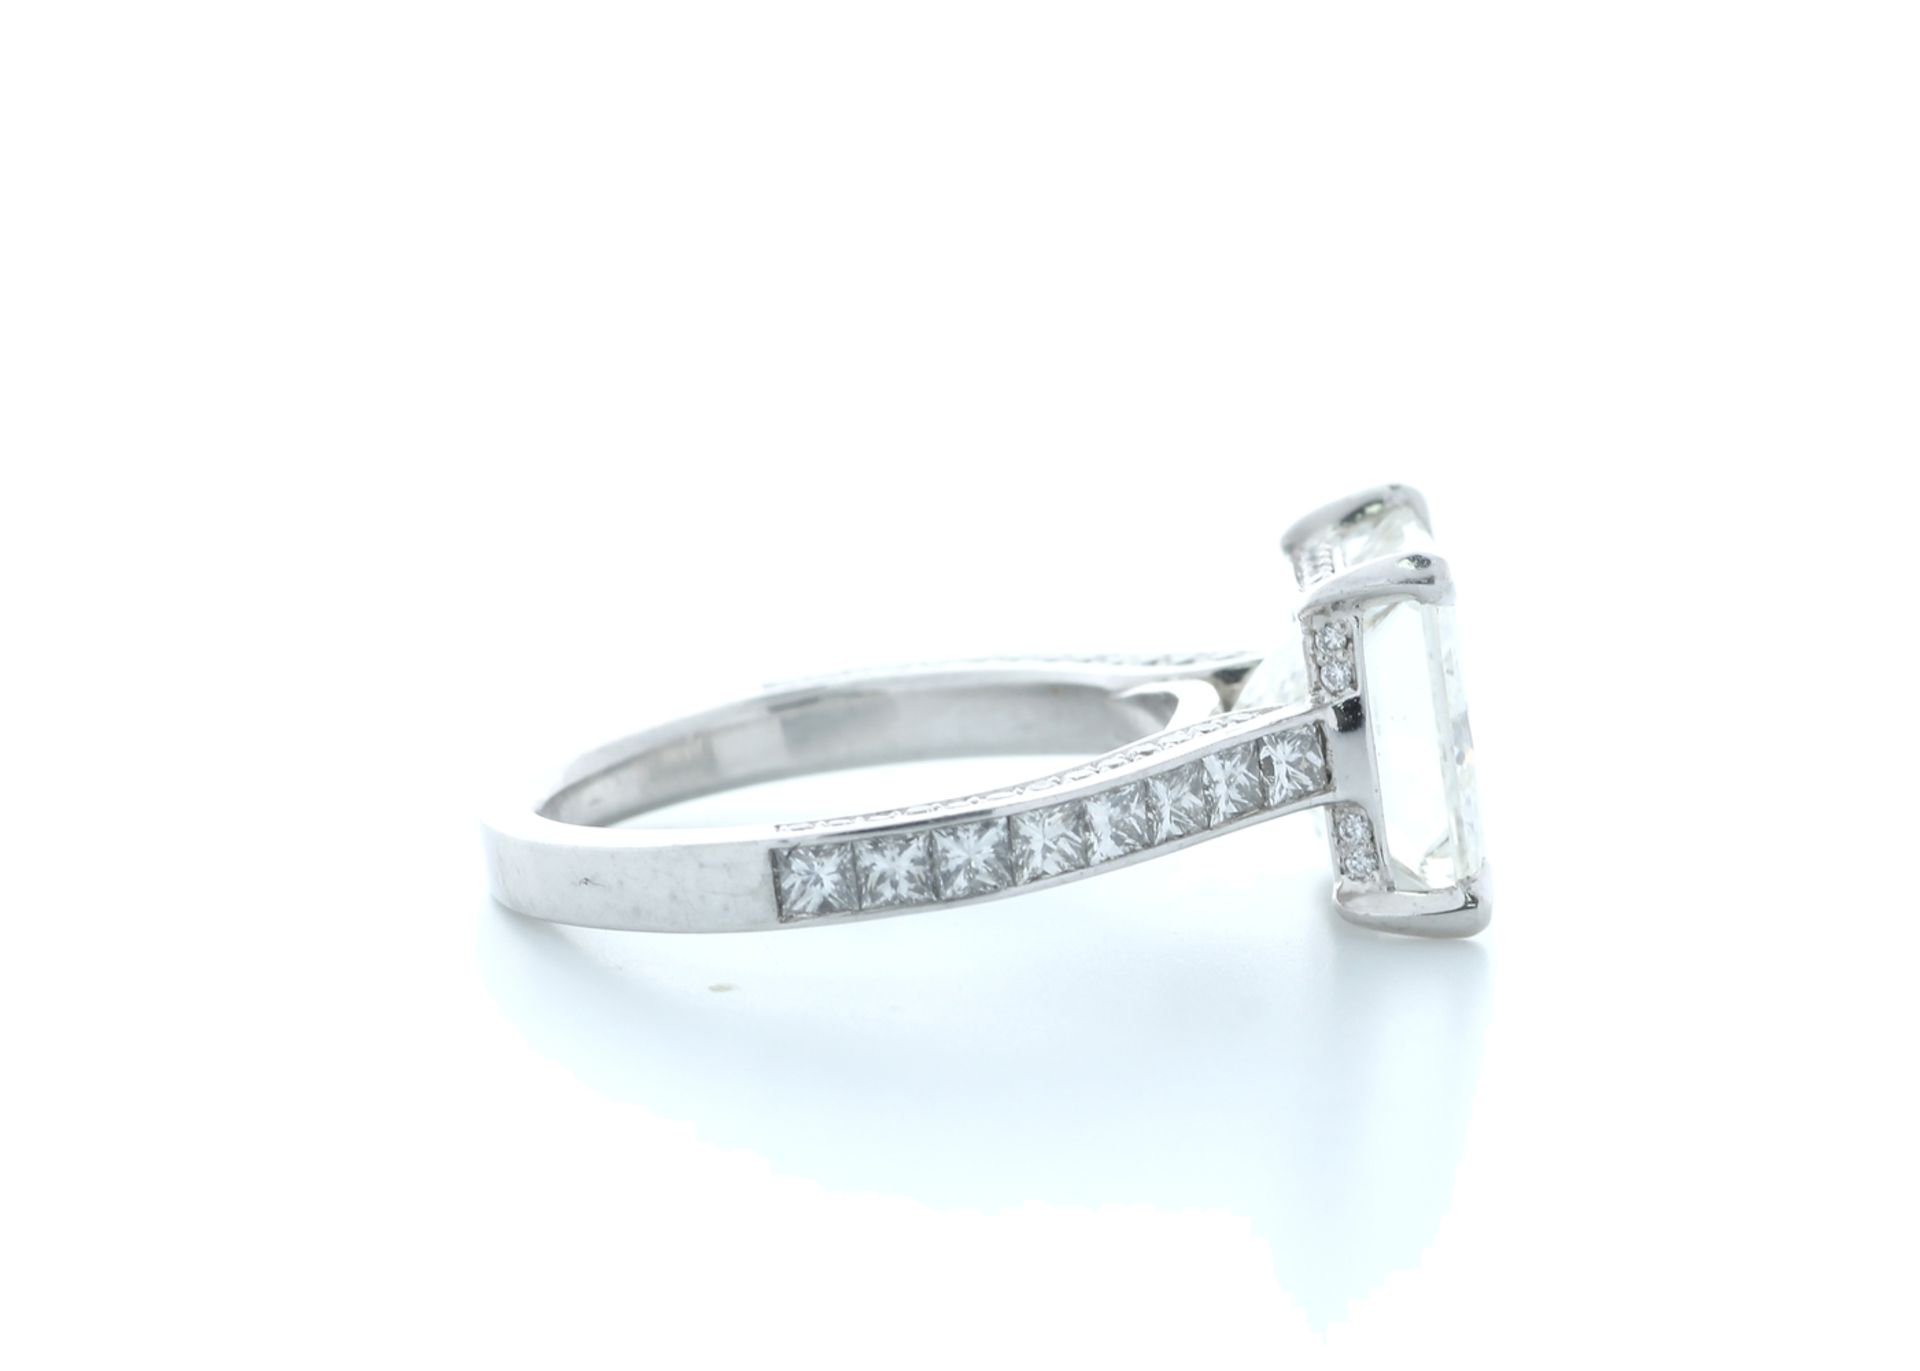 18ct White Gold Princess Cut Diamond Ring 5.13 (4.33) Carats - Valued by IDI £280,000.00 - 18ct - Image 4 of 5